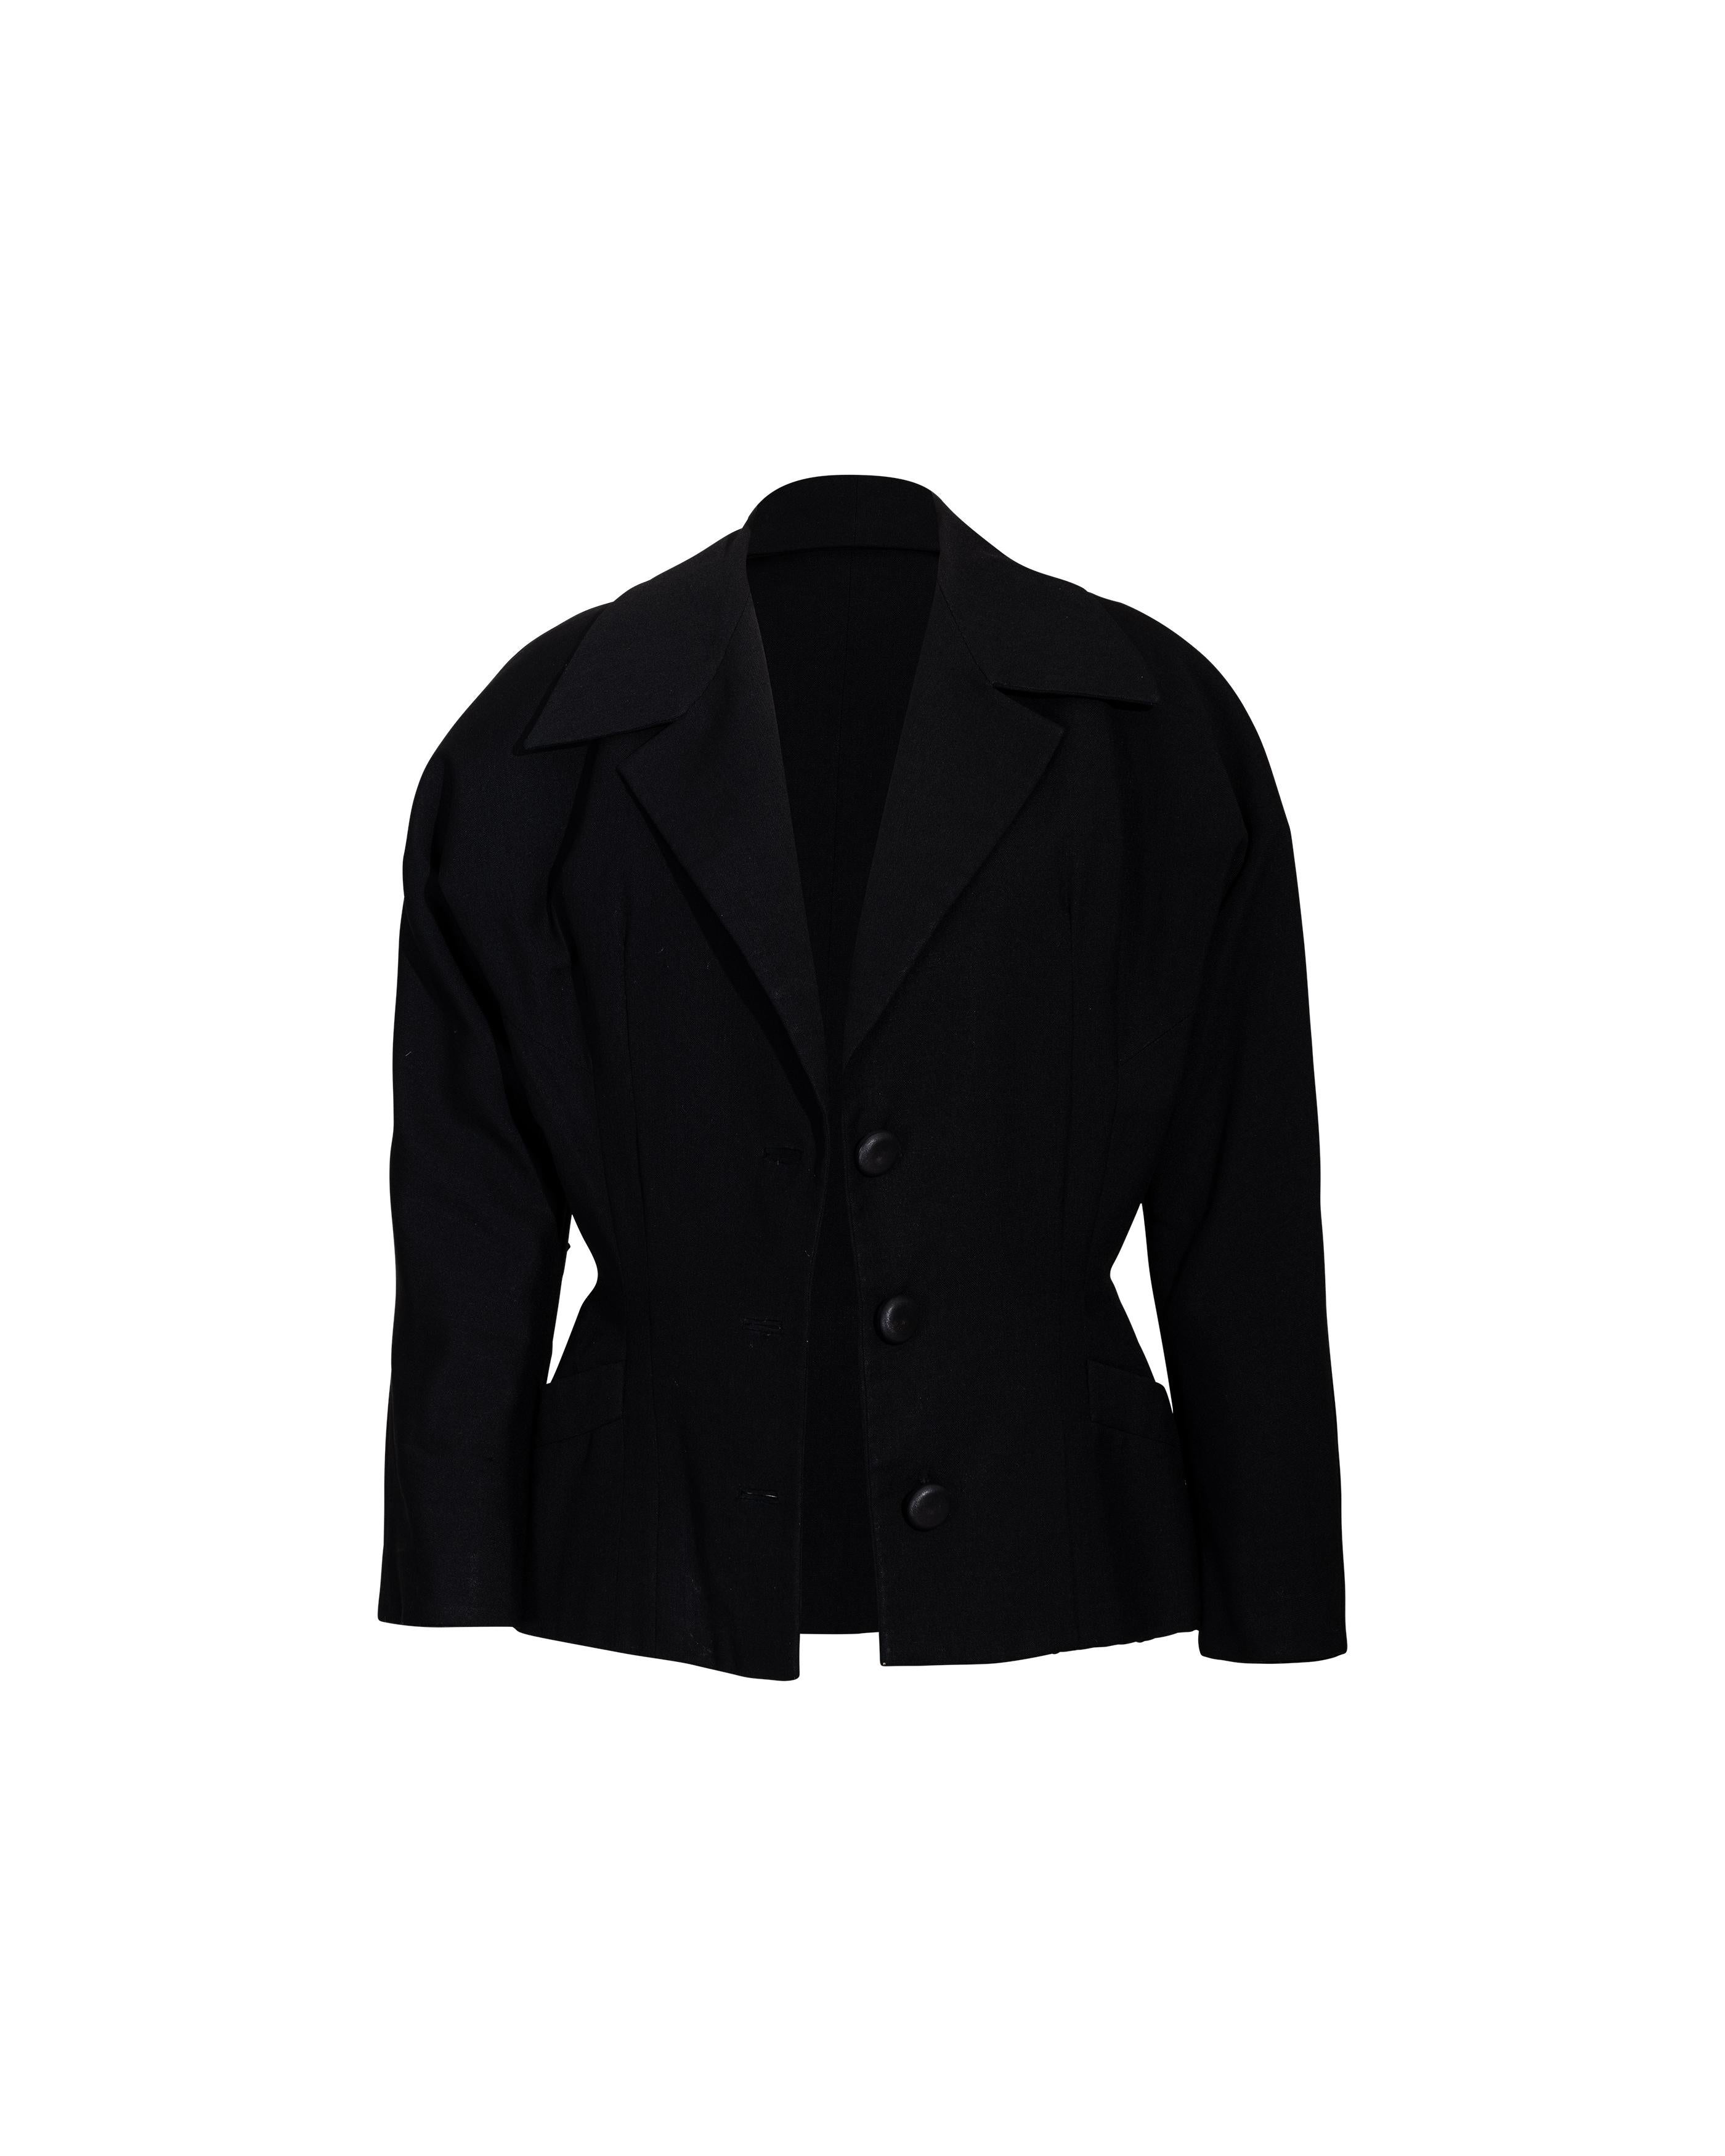 c. 1950 Christian Dior 'New Look' Black Wool Jacket For Sale 2